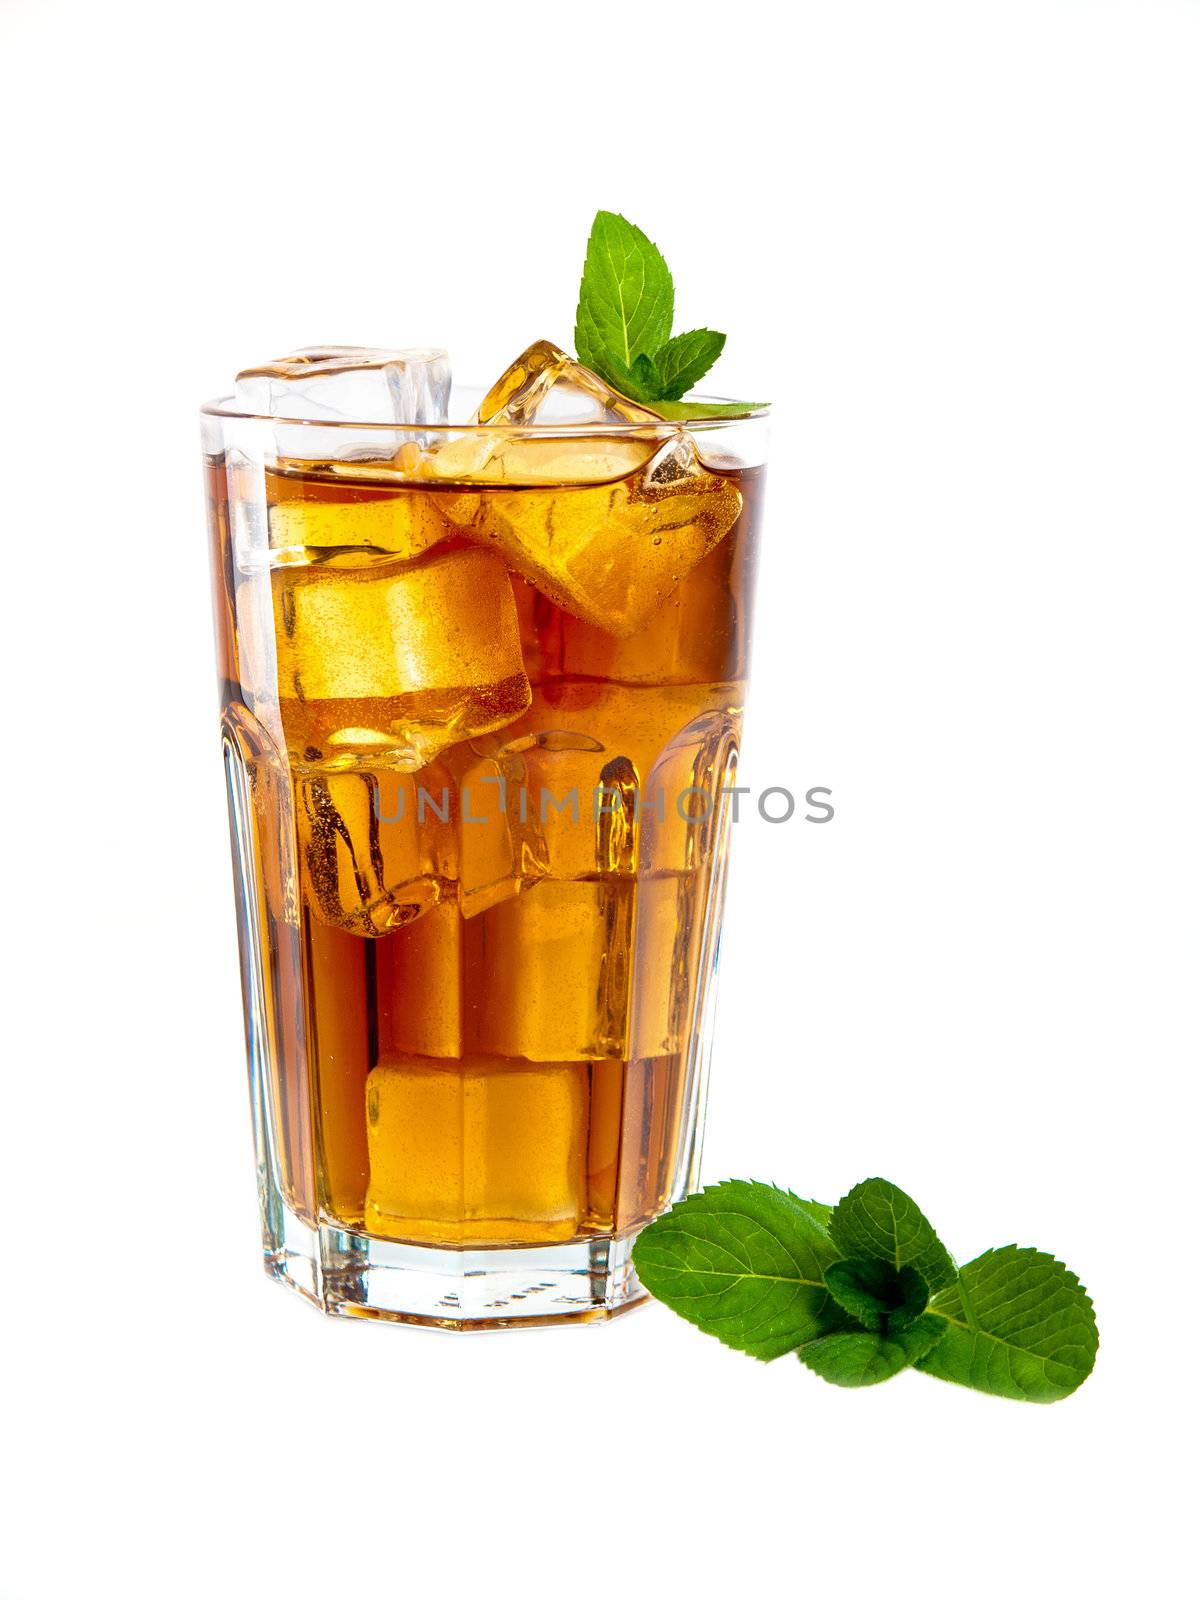 Large glass of refreshing mint ice tea, isolated on white